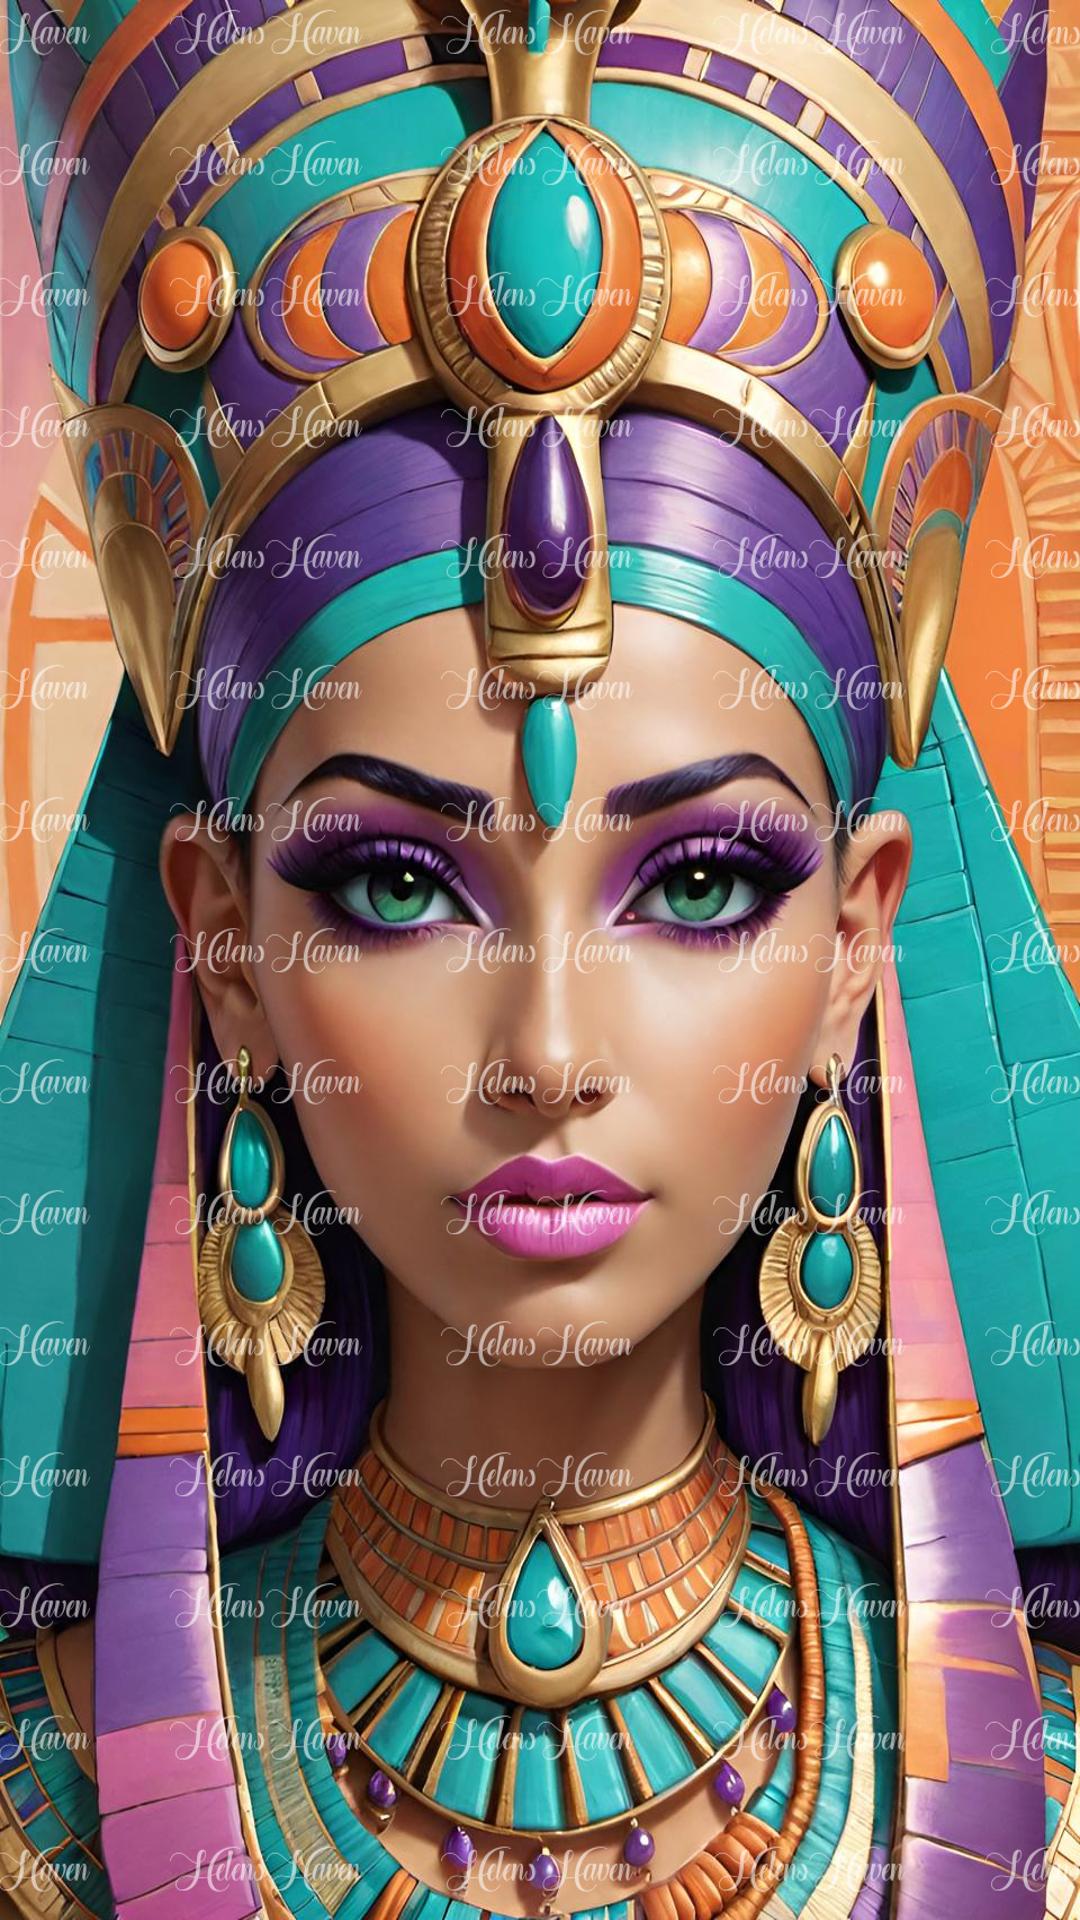 Cleopatra wearing colourful teal and purple headgear